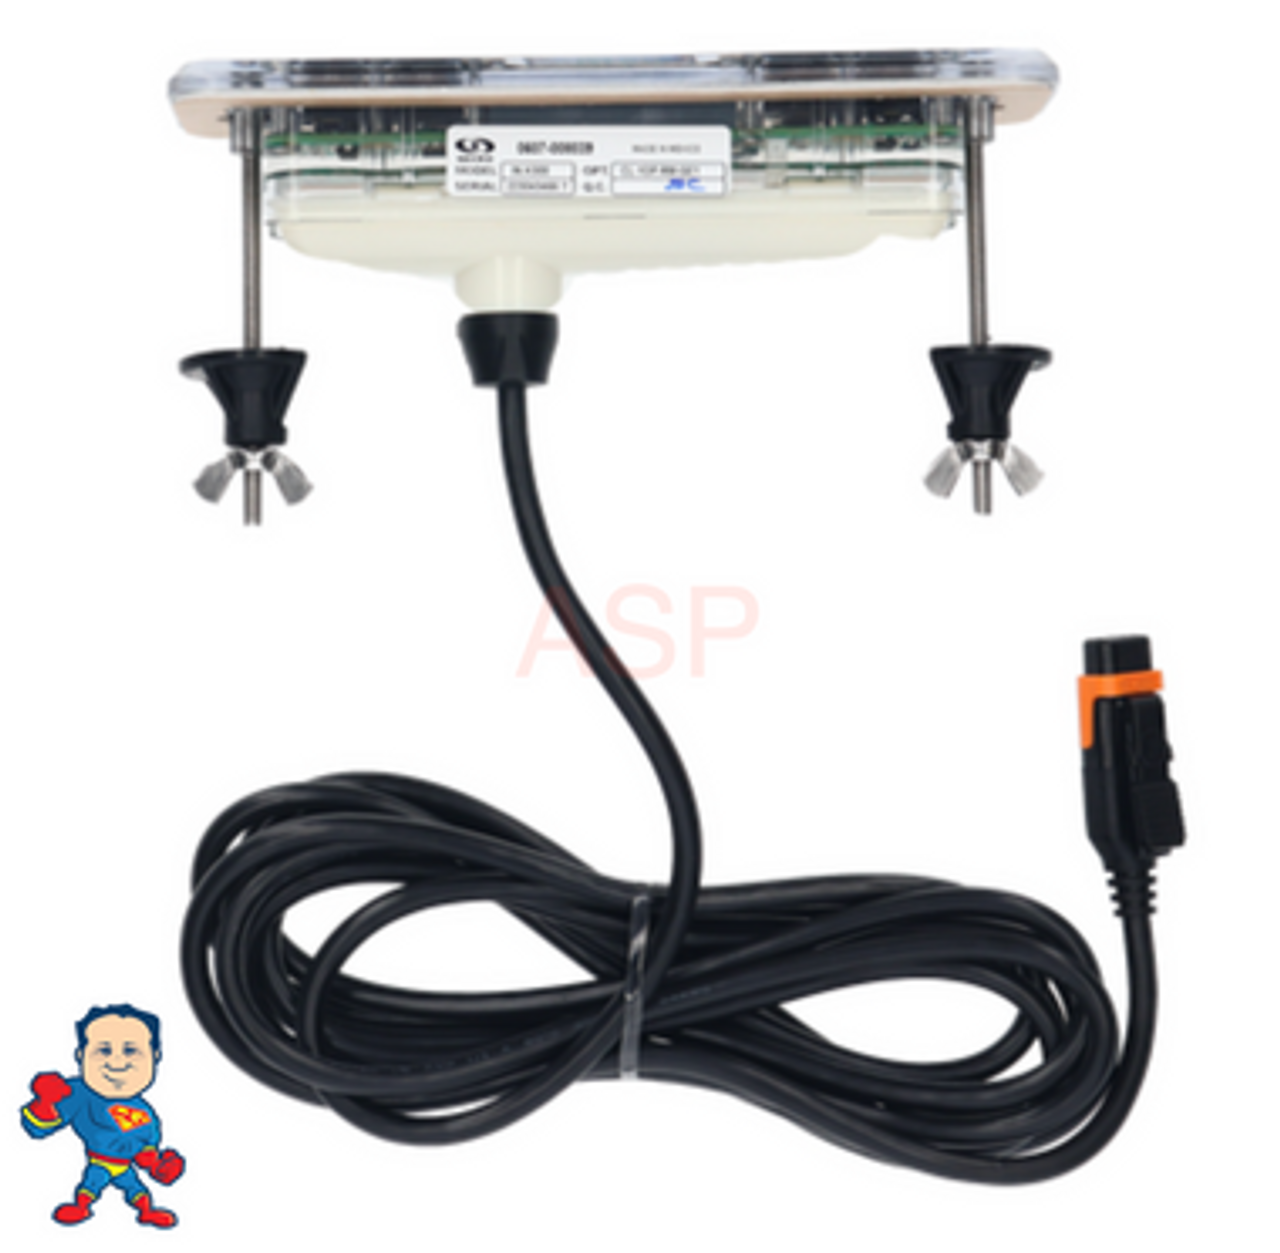 Topside  Control, Gecko, IN.K300, 4-Button, LCD, Pump1, Pump2, 10' Cable, w/in.link Plug